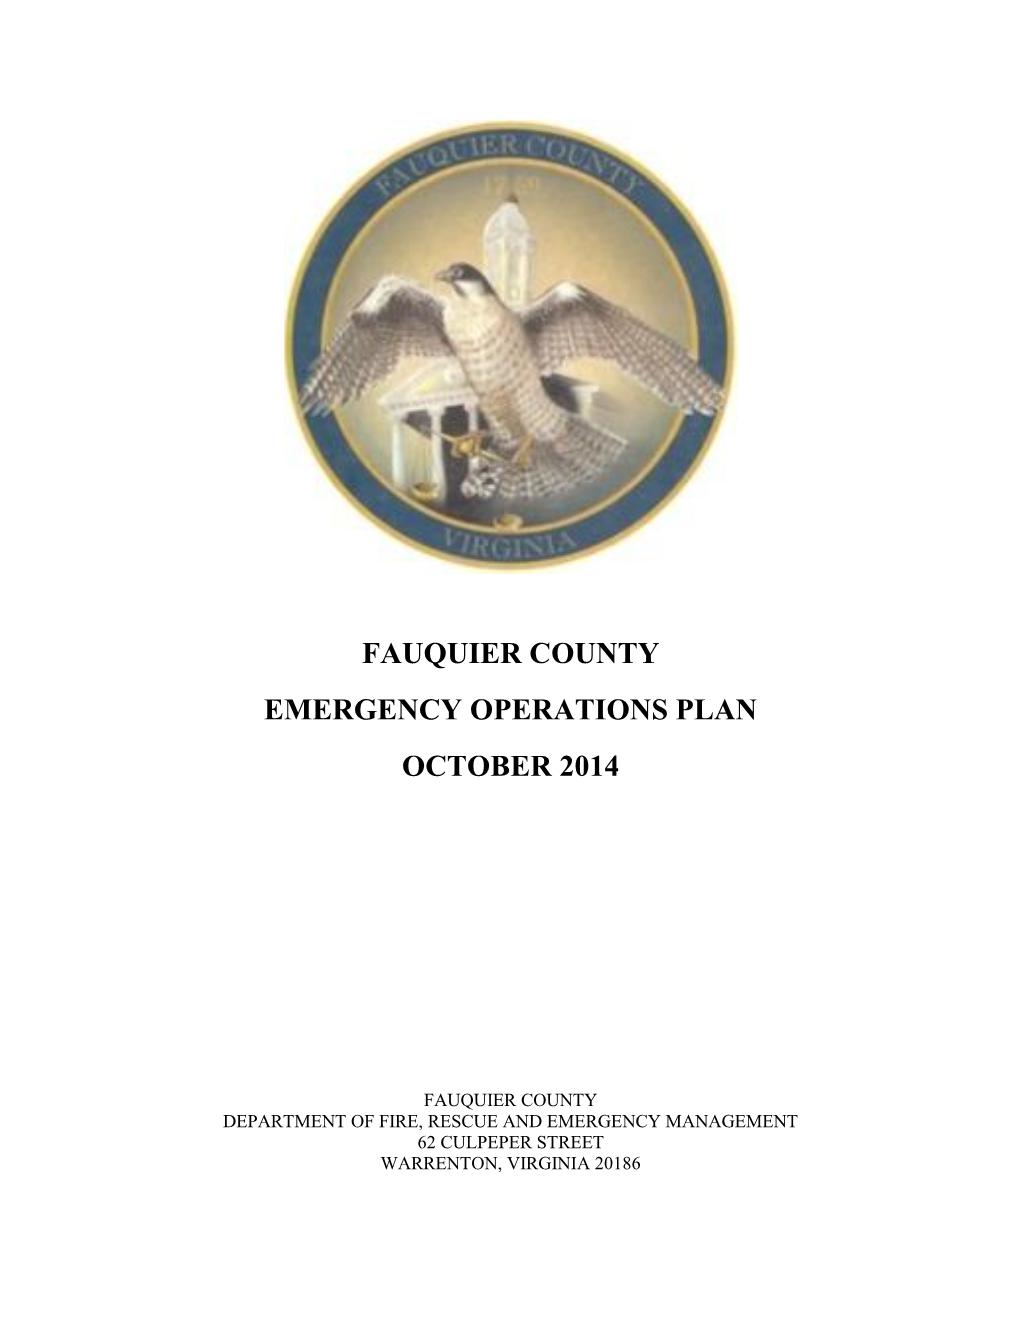 Fauquier County Emergency Operations Plan October 2014